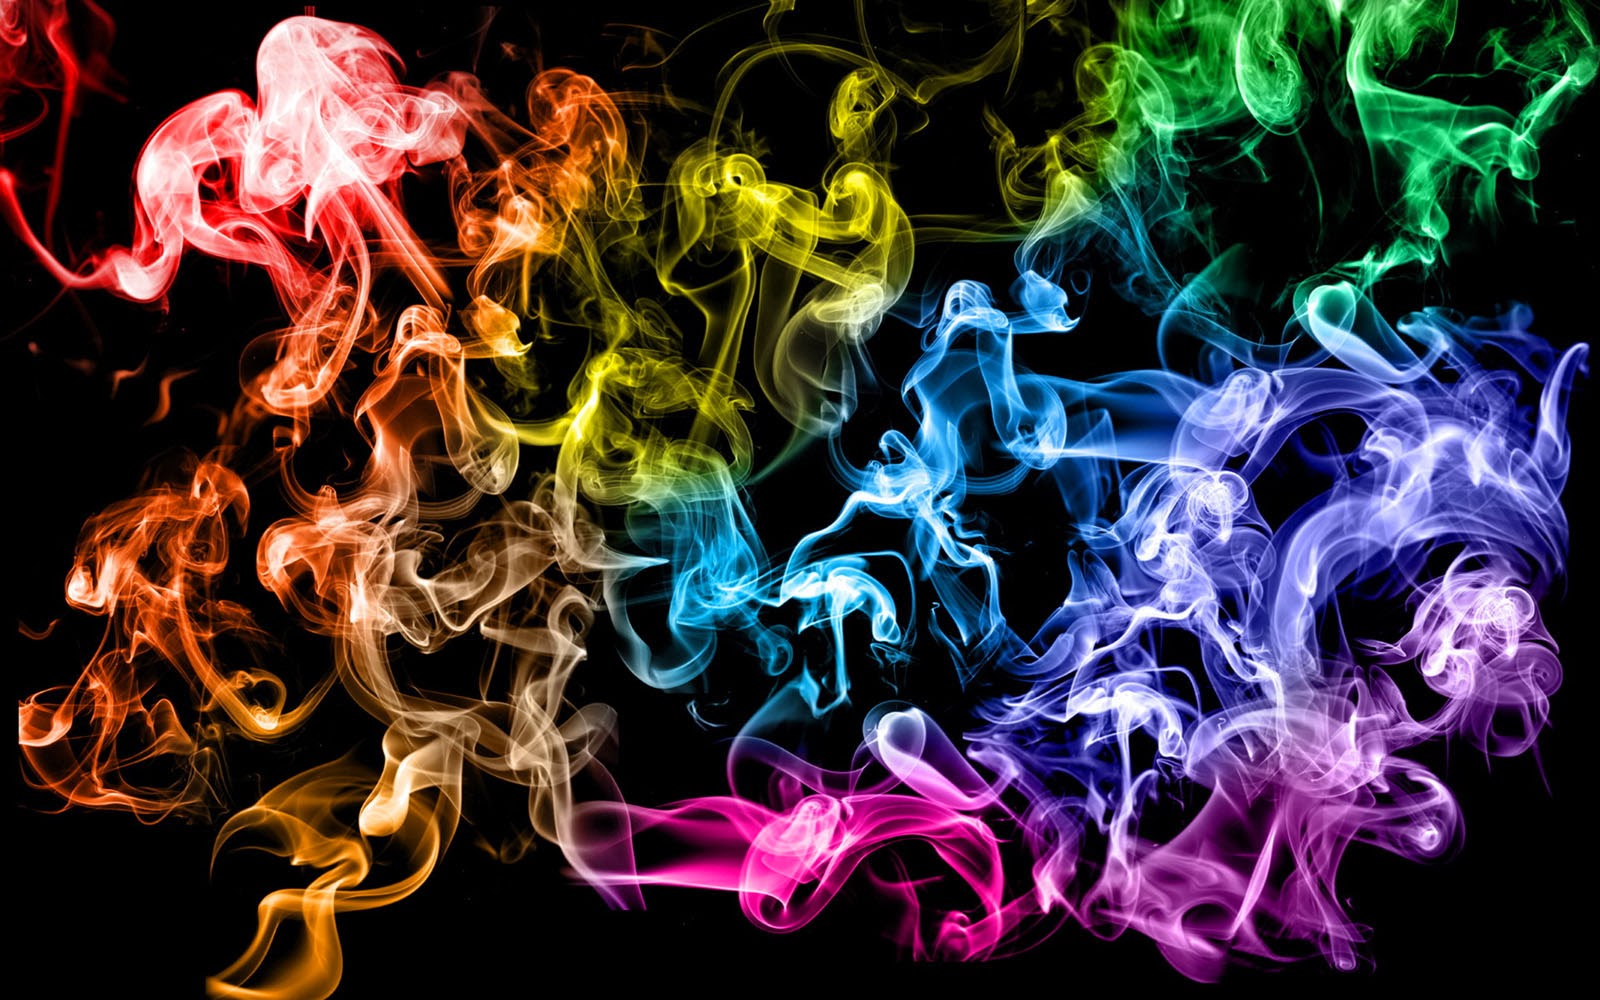 Wallpapers Colorful Smoke Wallpapers Coloring Wallpapers Download Free Images Wallpaper [coloring654.blogspot.com]